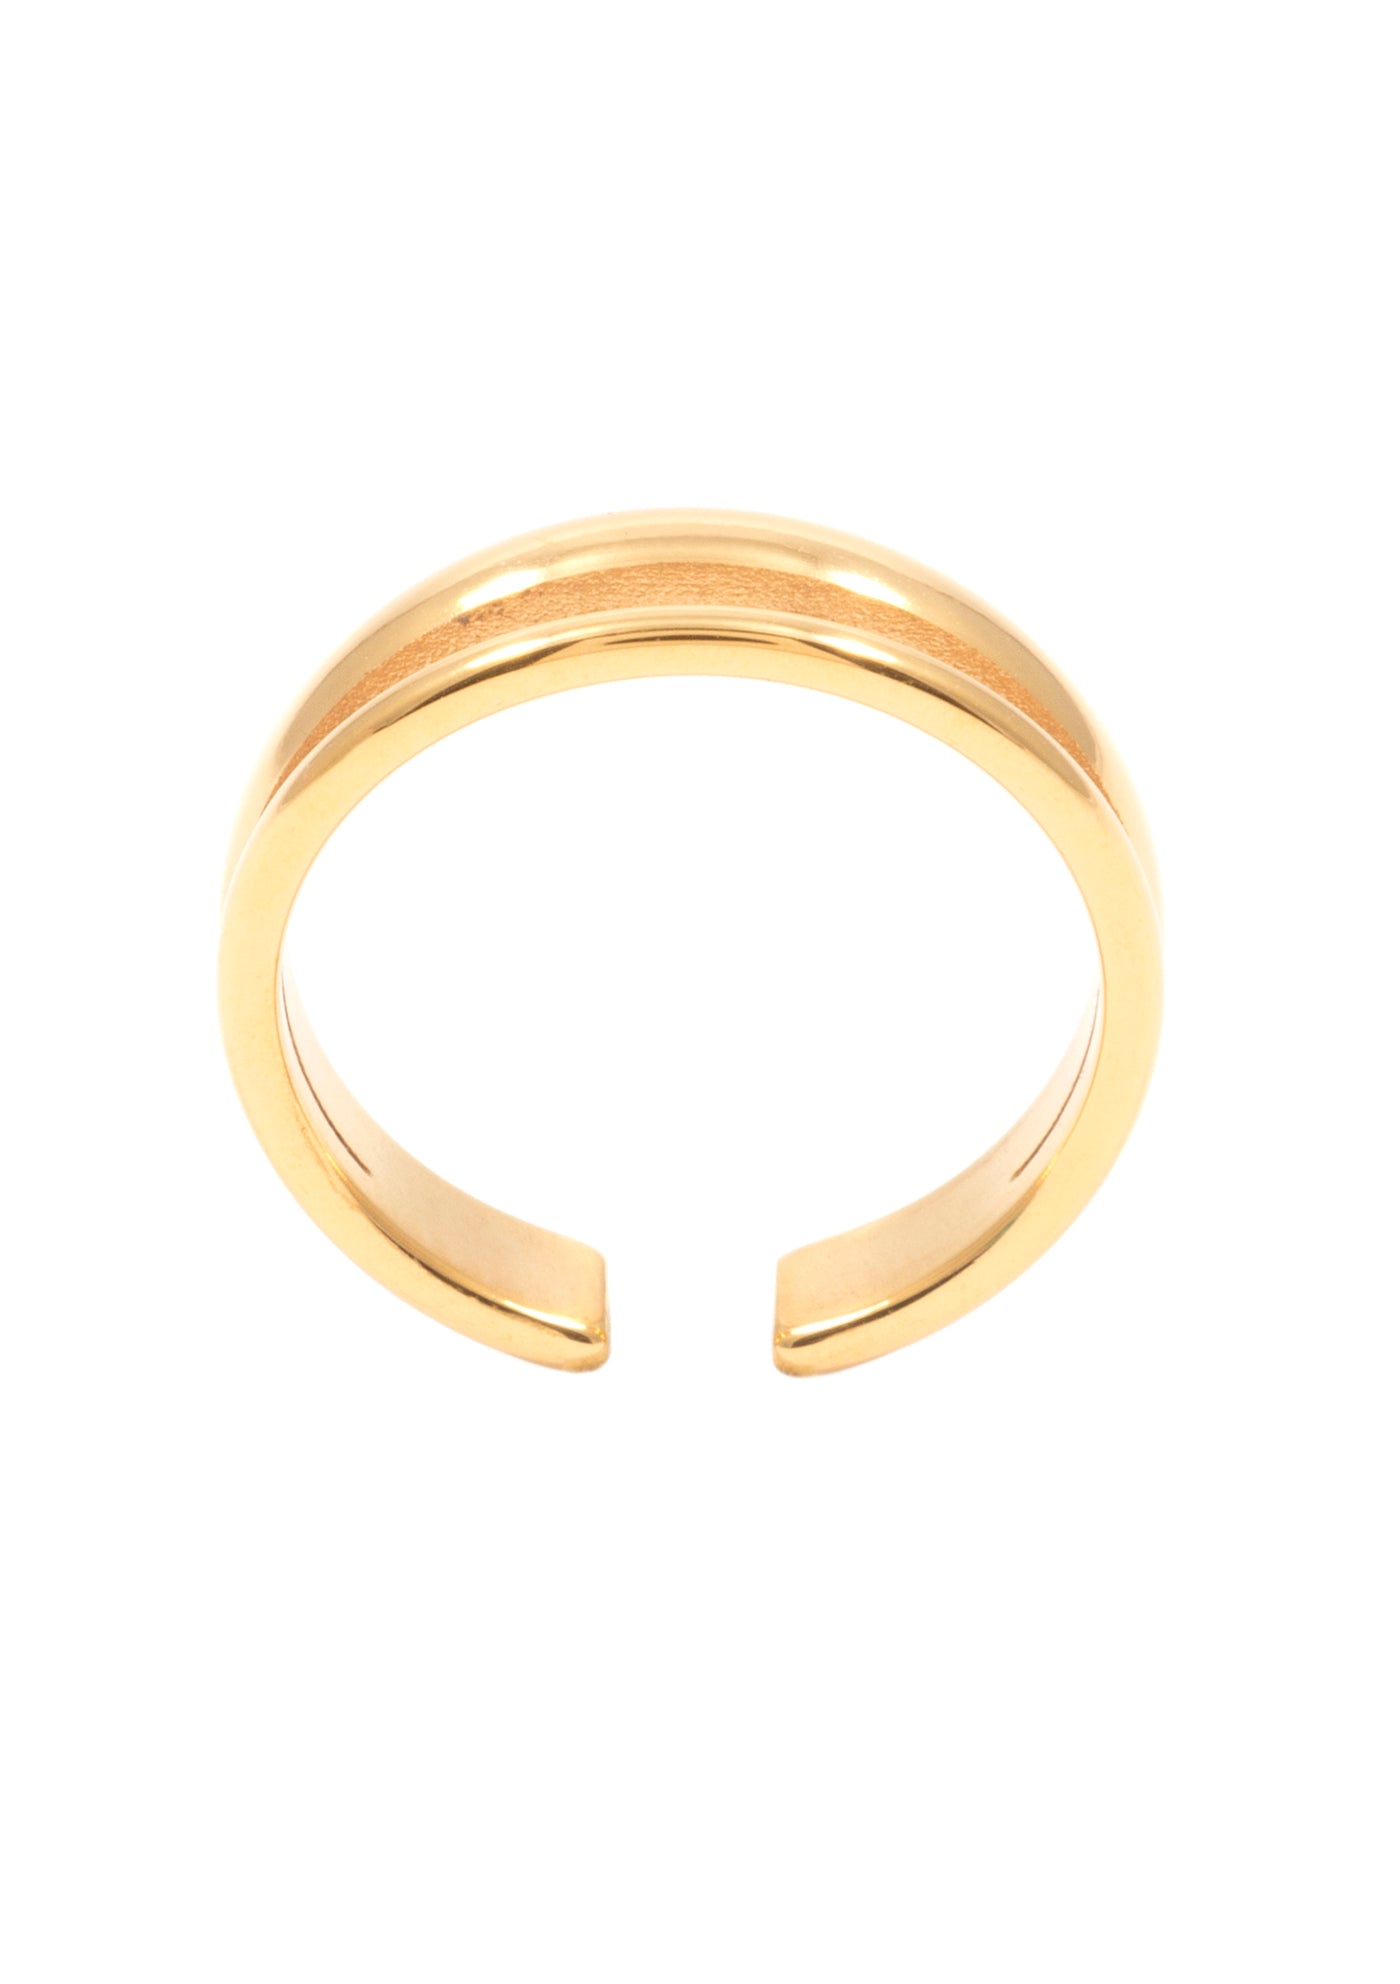 Double Band Simple Ring